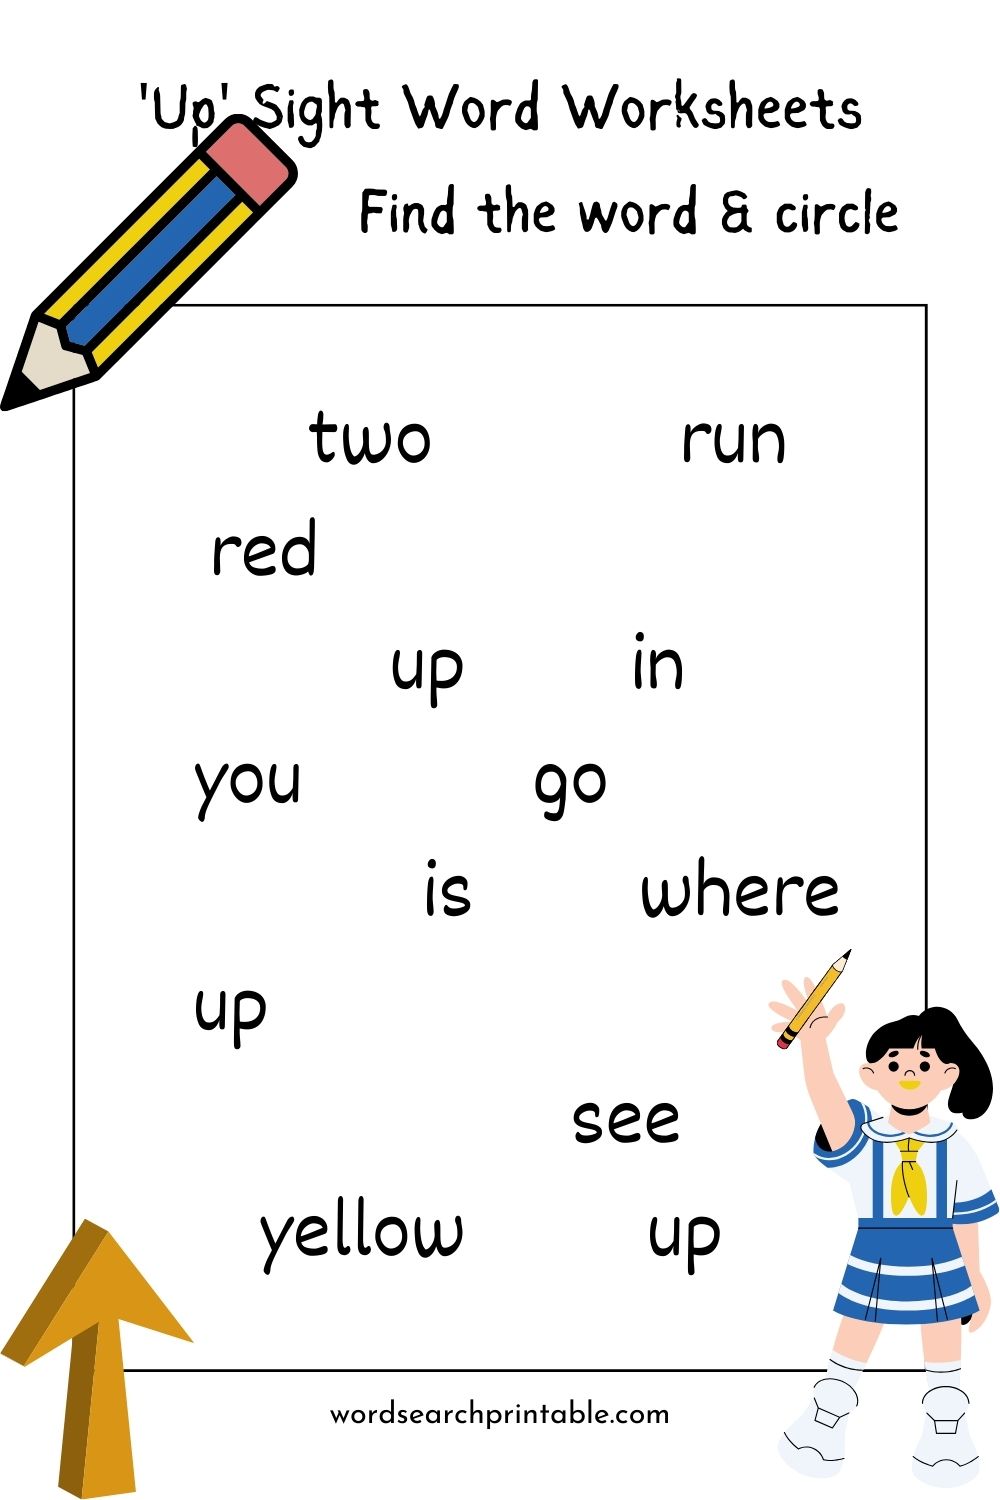 Find the sight word Up and circle it - Sight word Up word hunt